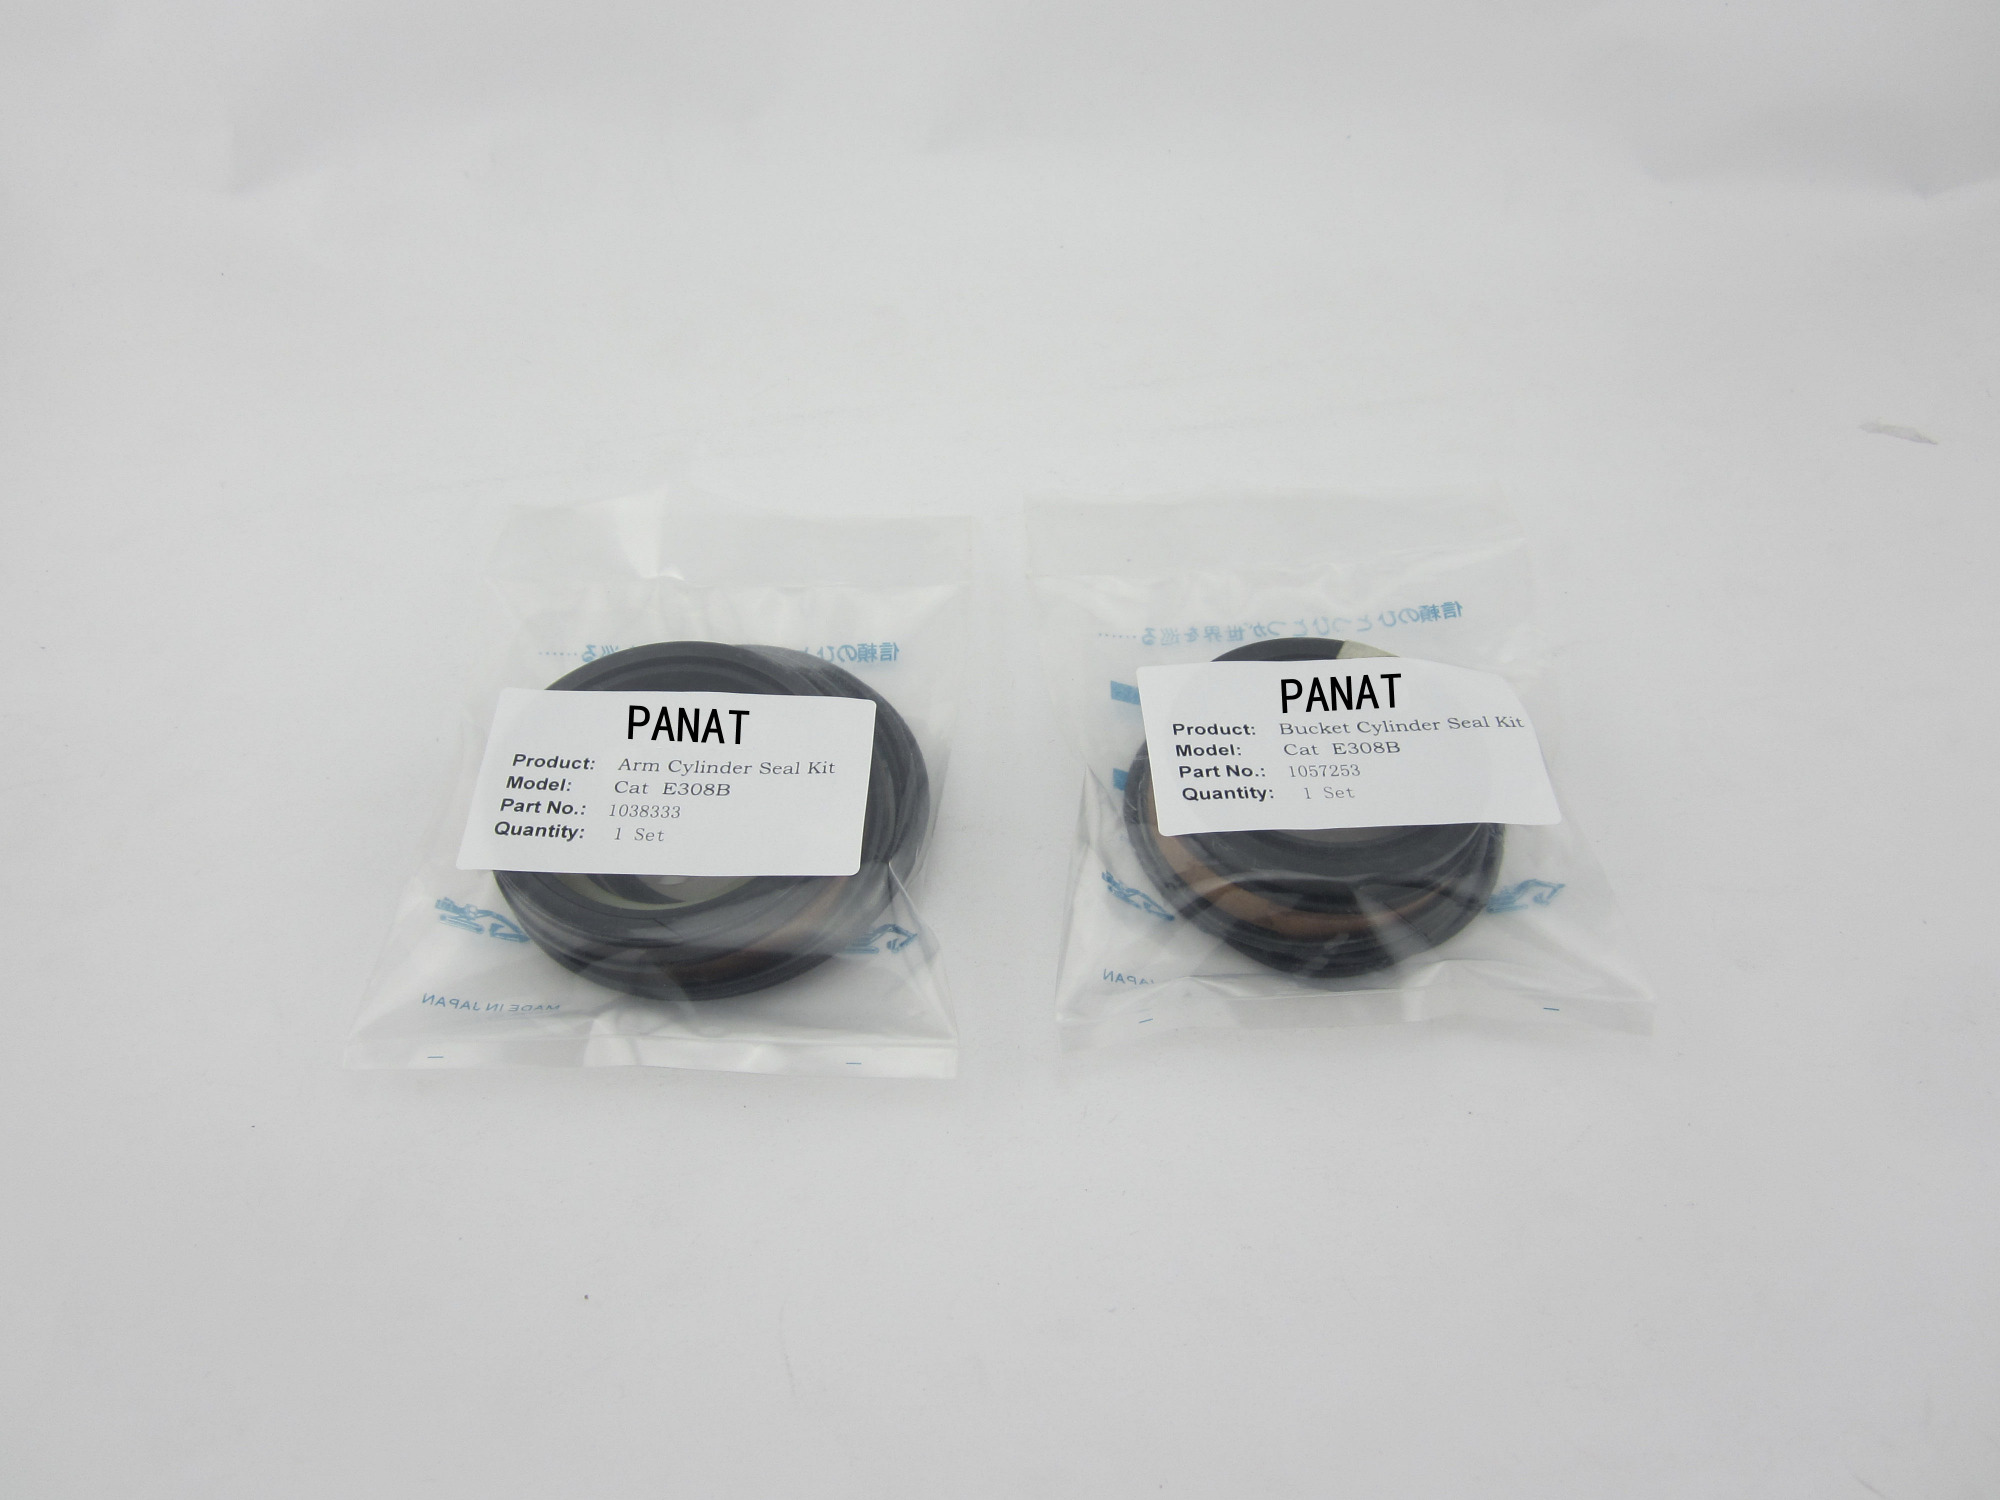 Spare part for CATERPILLAR: KIT-SEAL - 7X2698 for models 3116, 3126, 3126B, IT62G, 950F II, 950G, 950G II, 960F, 962G, 962G II